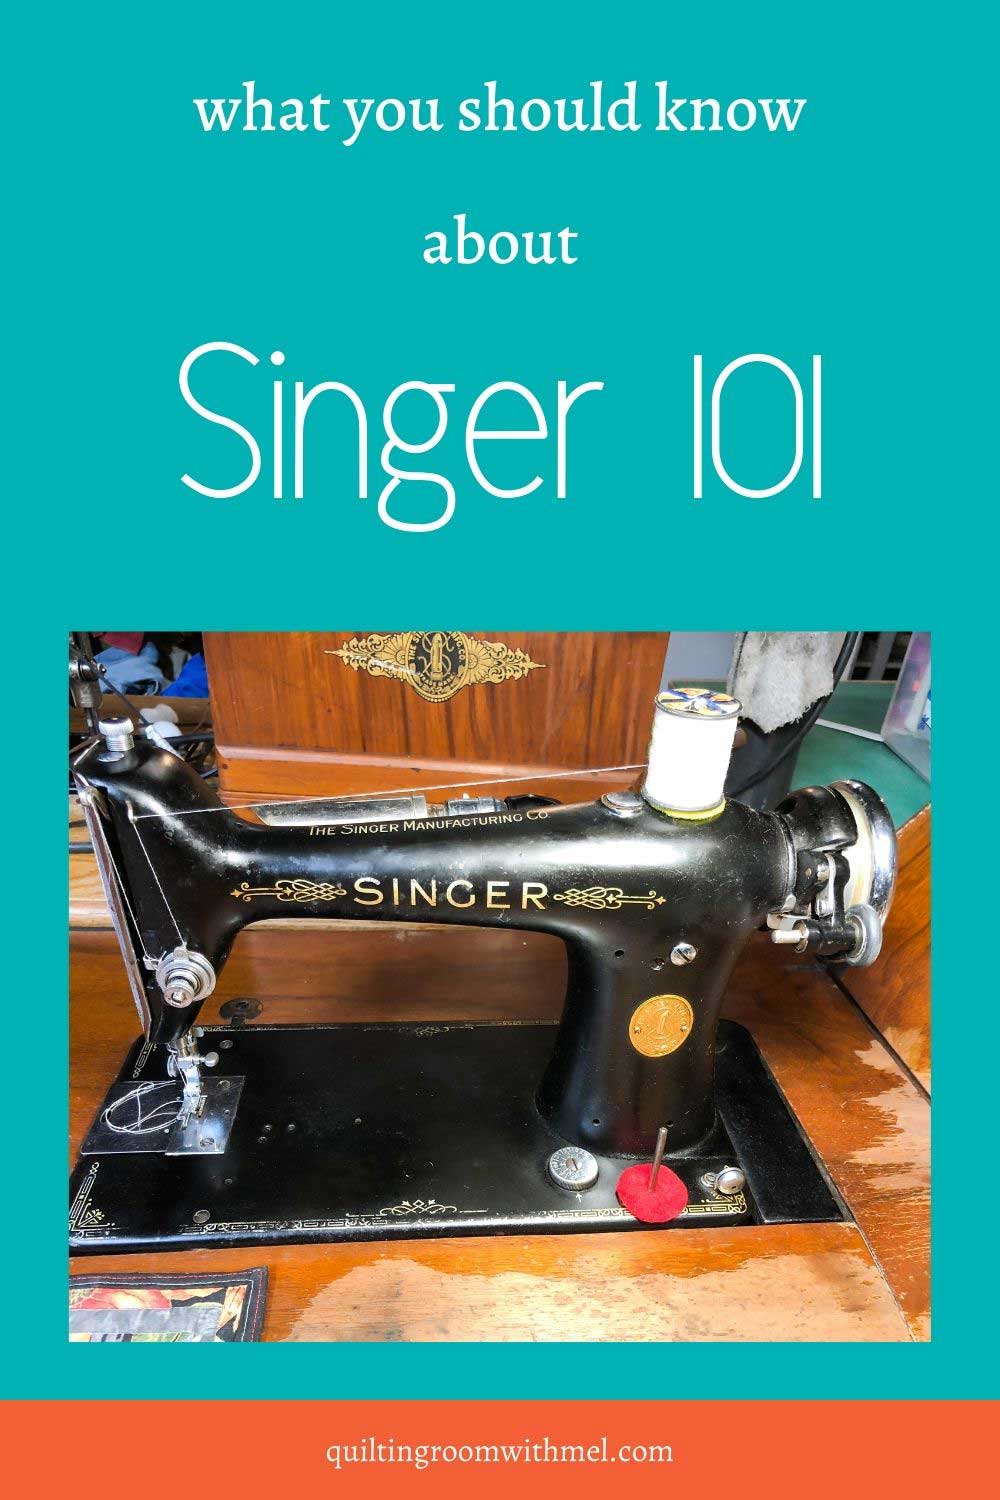 The Singer 101 Sewing Machine: A Vintage Piece of History